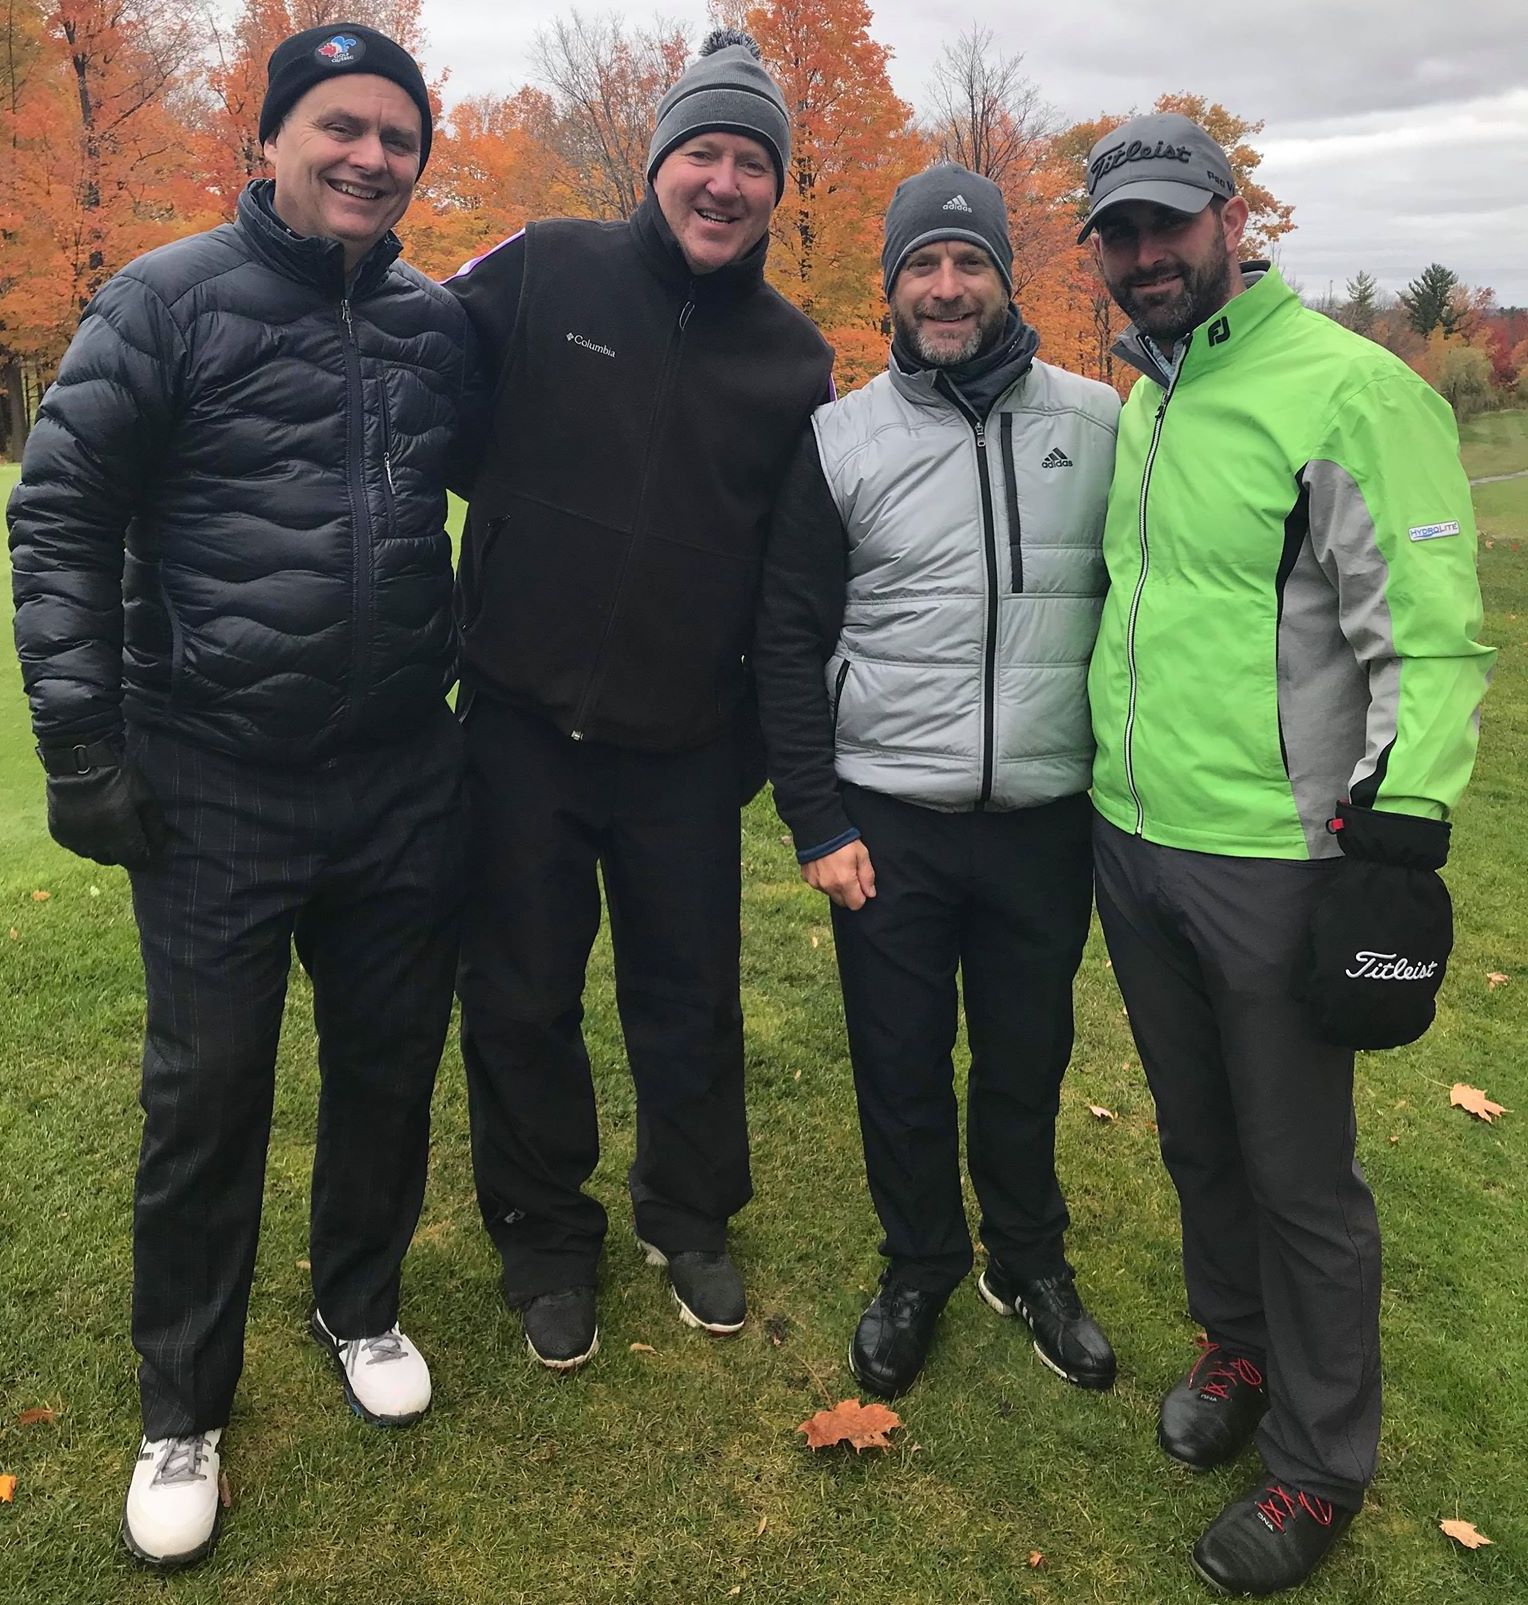 GGGolf President Gilles Gauthier teamed with Jean Pilon of Club de golf Champlain, Éric Laporte of Montcalm and Marc-Antoine Lamoureux of St-Hyacinthe to win the 2019 BPG Golf Tournament